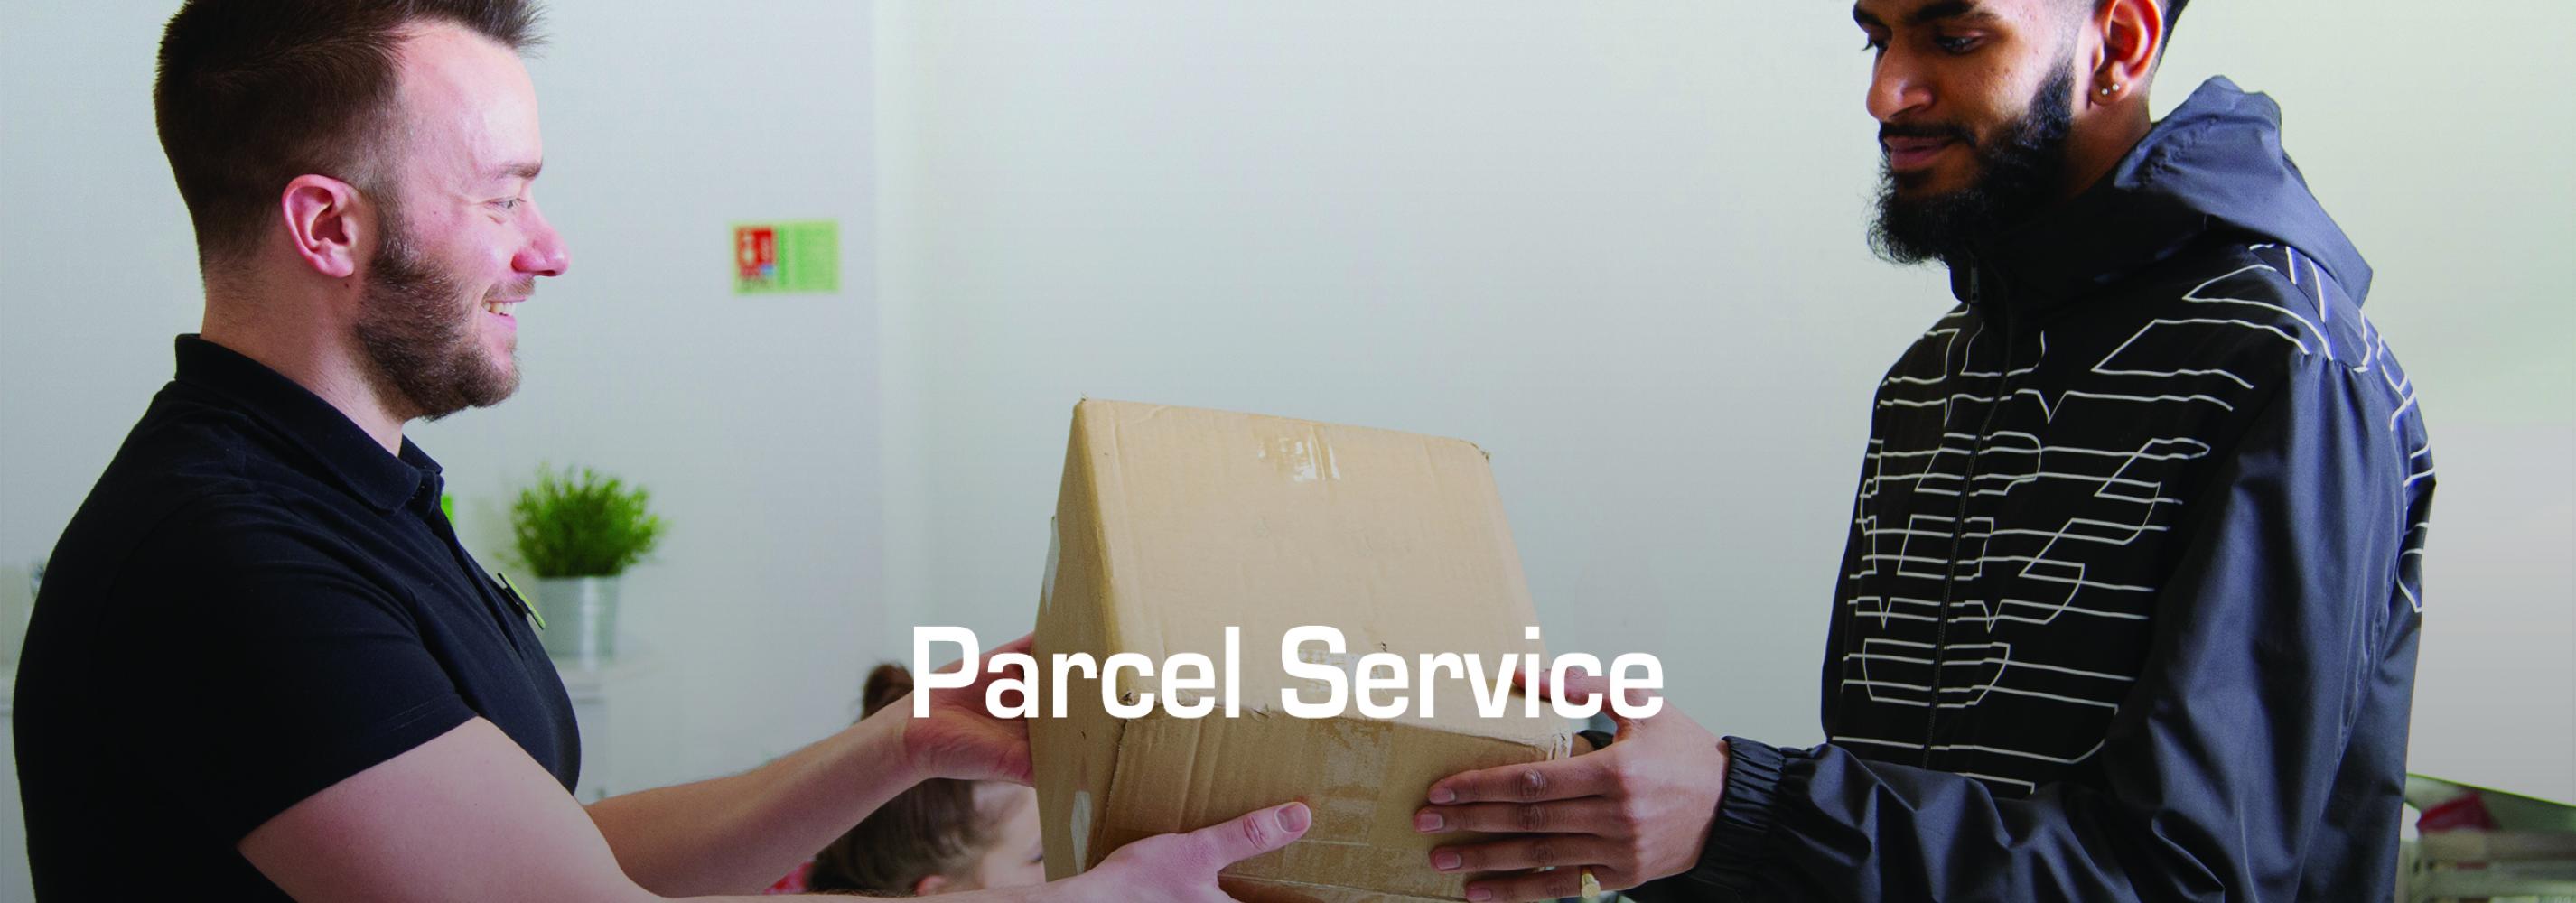 We'll take in your deliveries and email you when they are ready